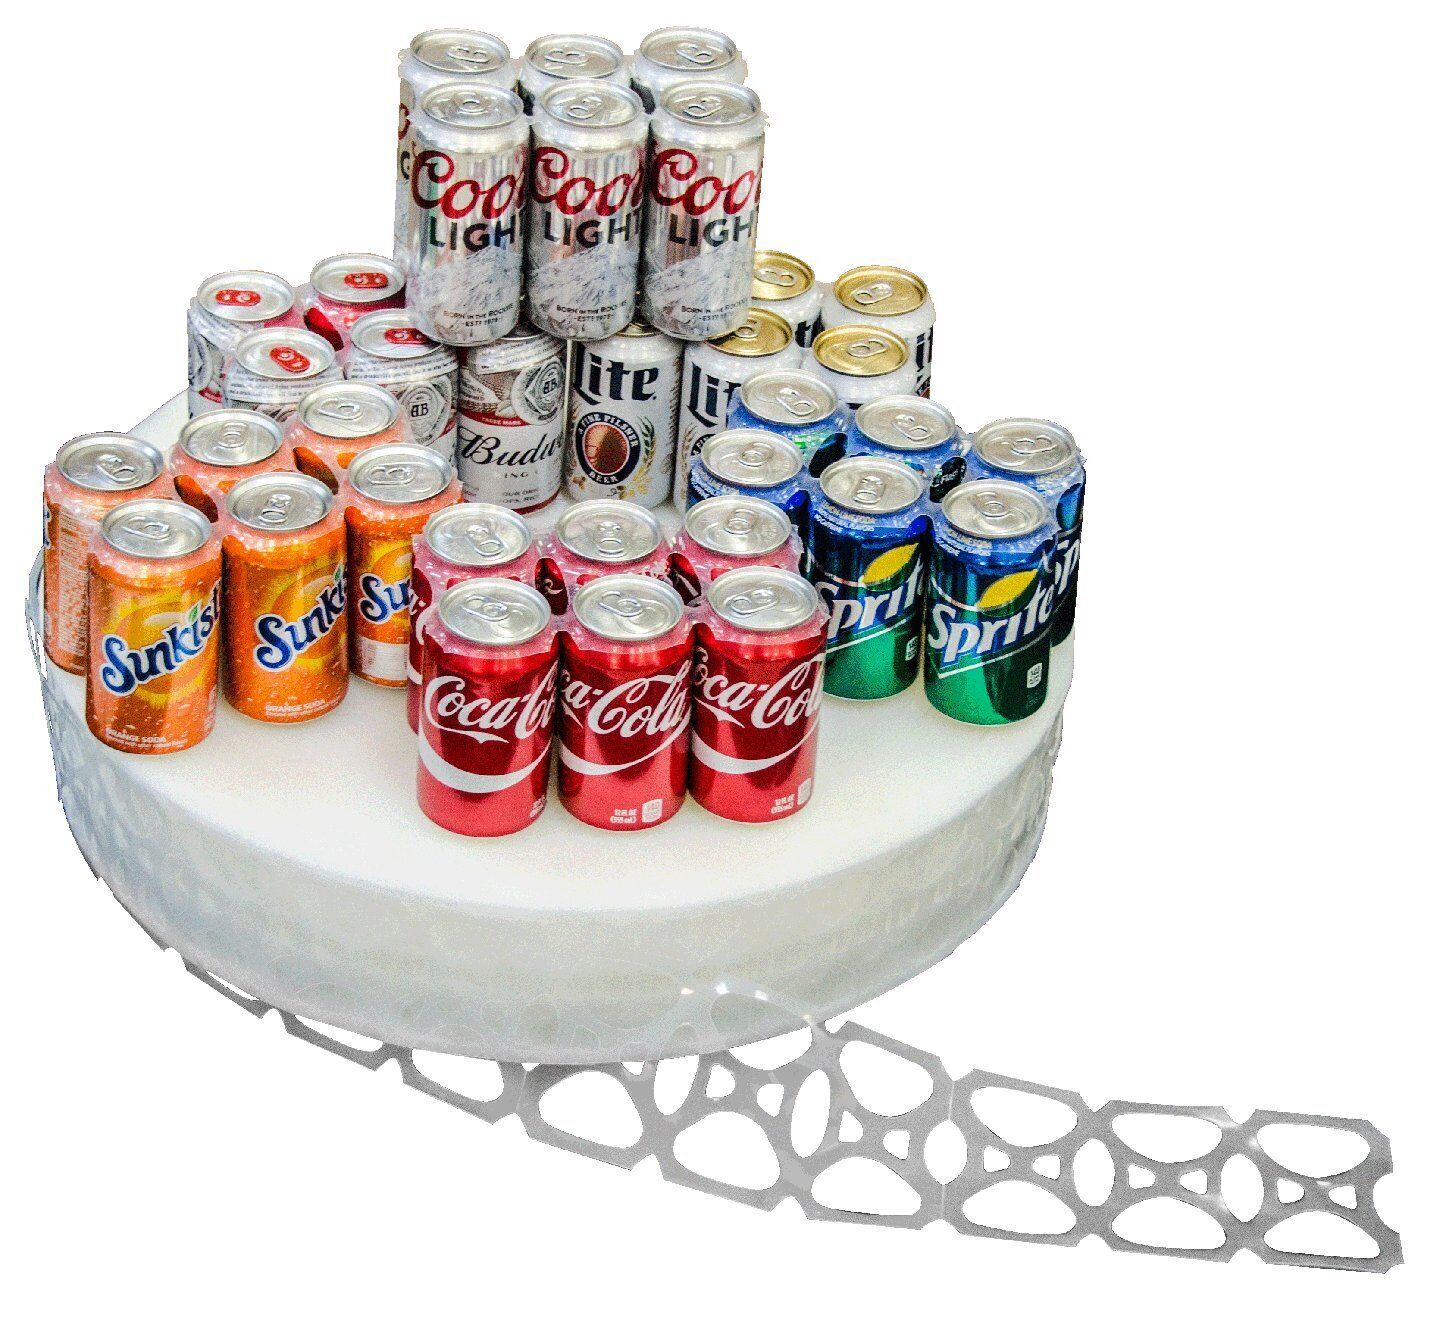 4300 Count Roll 6pk Rings Universal Fit - Fits all 12oz Beer Soda Cans - FAST...